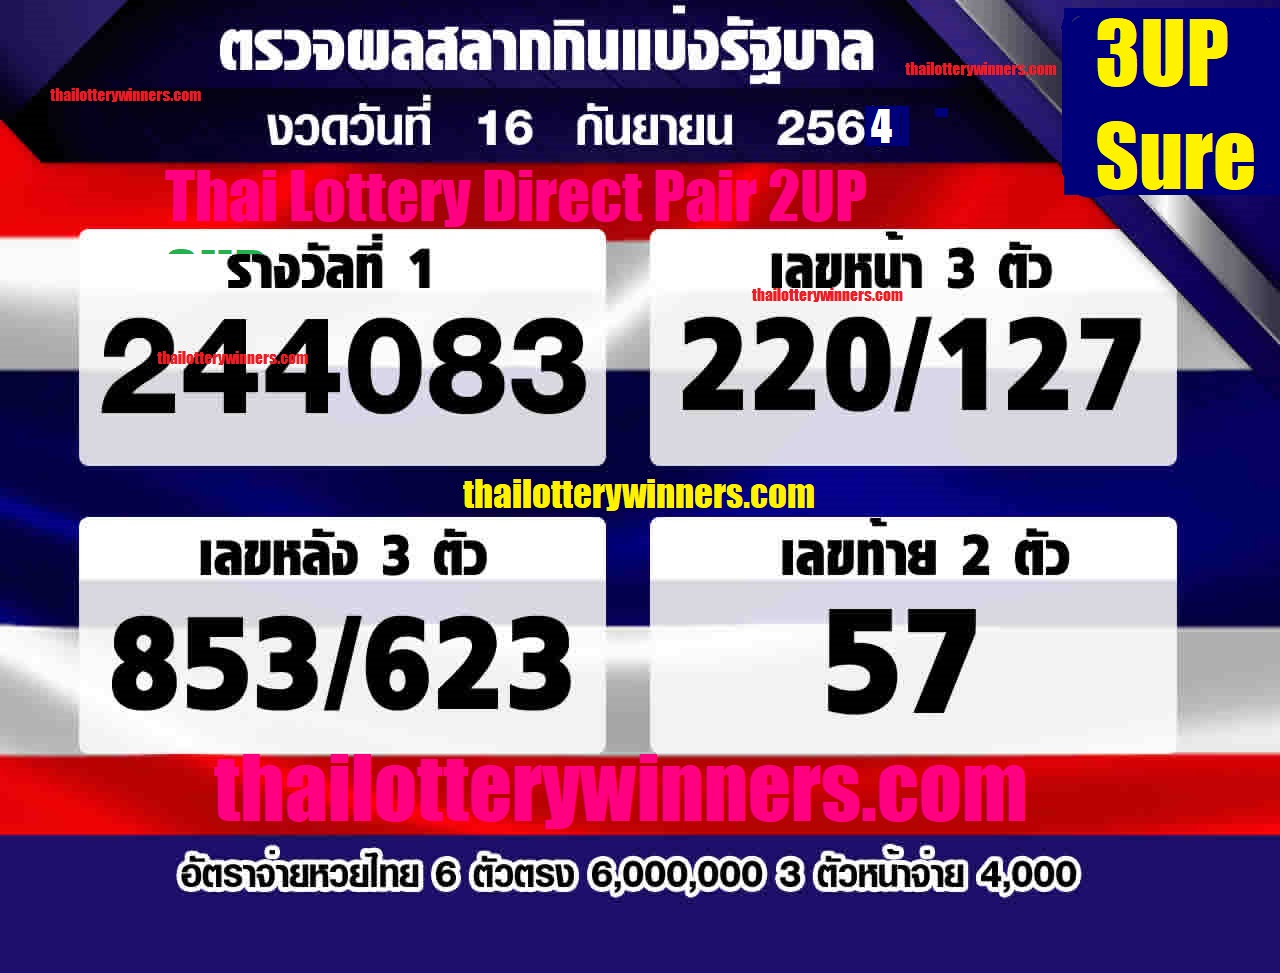 Thailand lottery result 3up sure